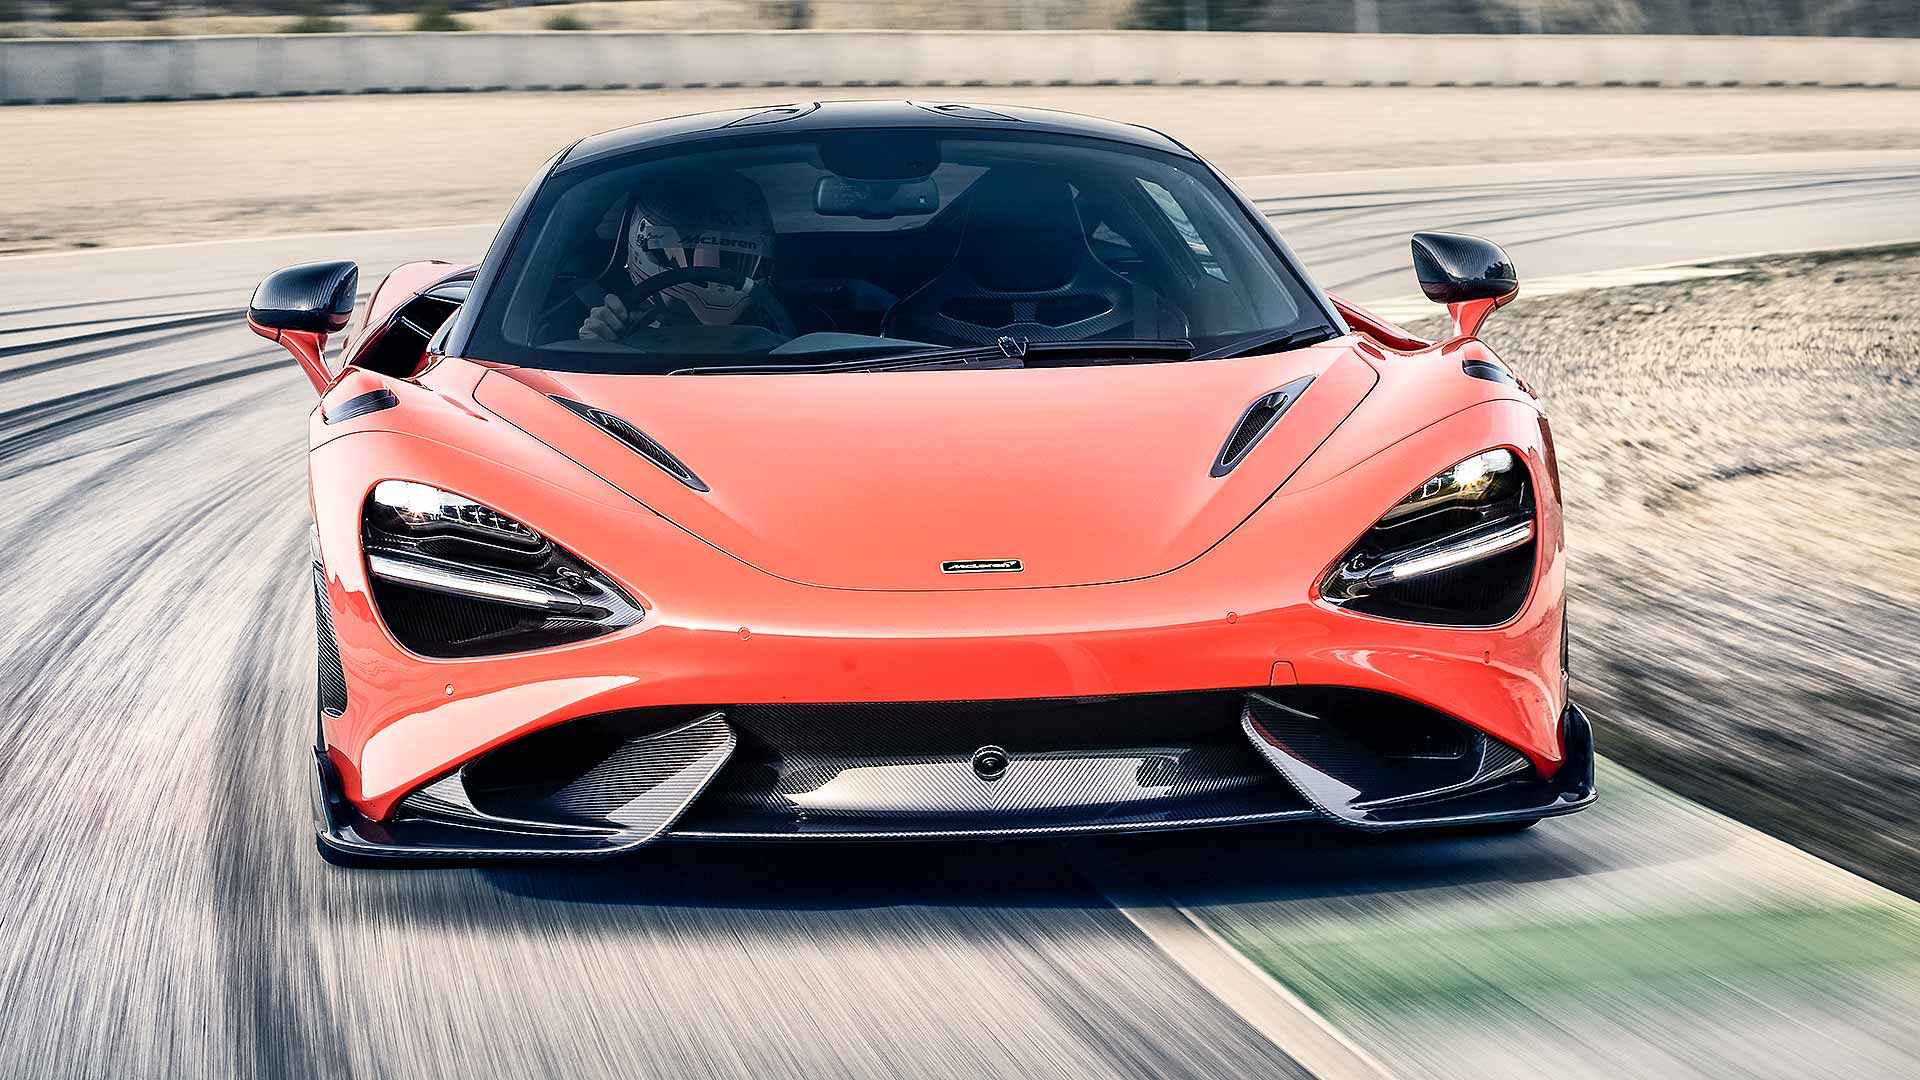 Hardcore McLaren 765LT is the most powerful ‘Longtail’ yet